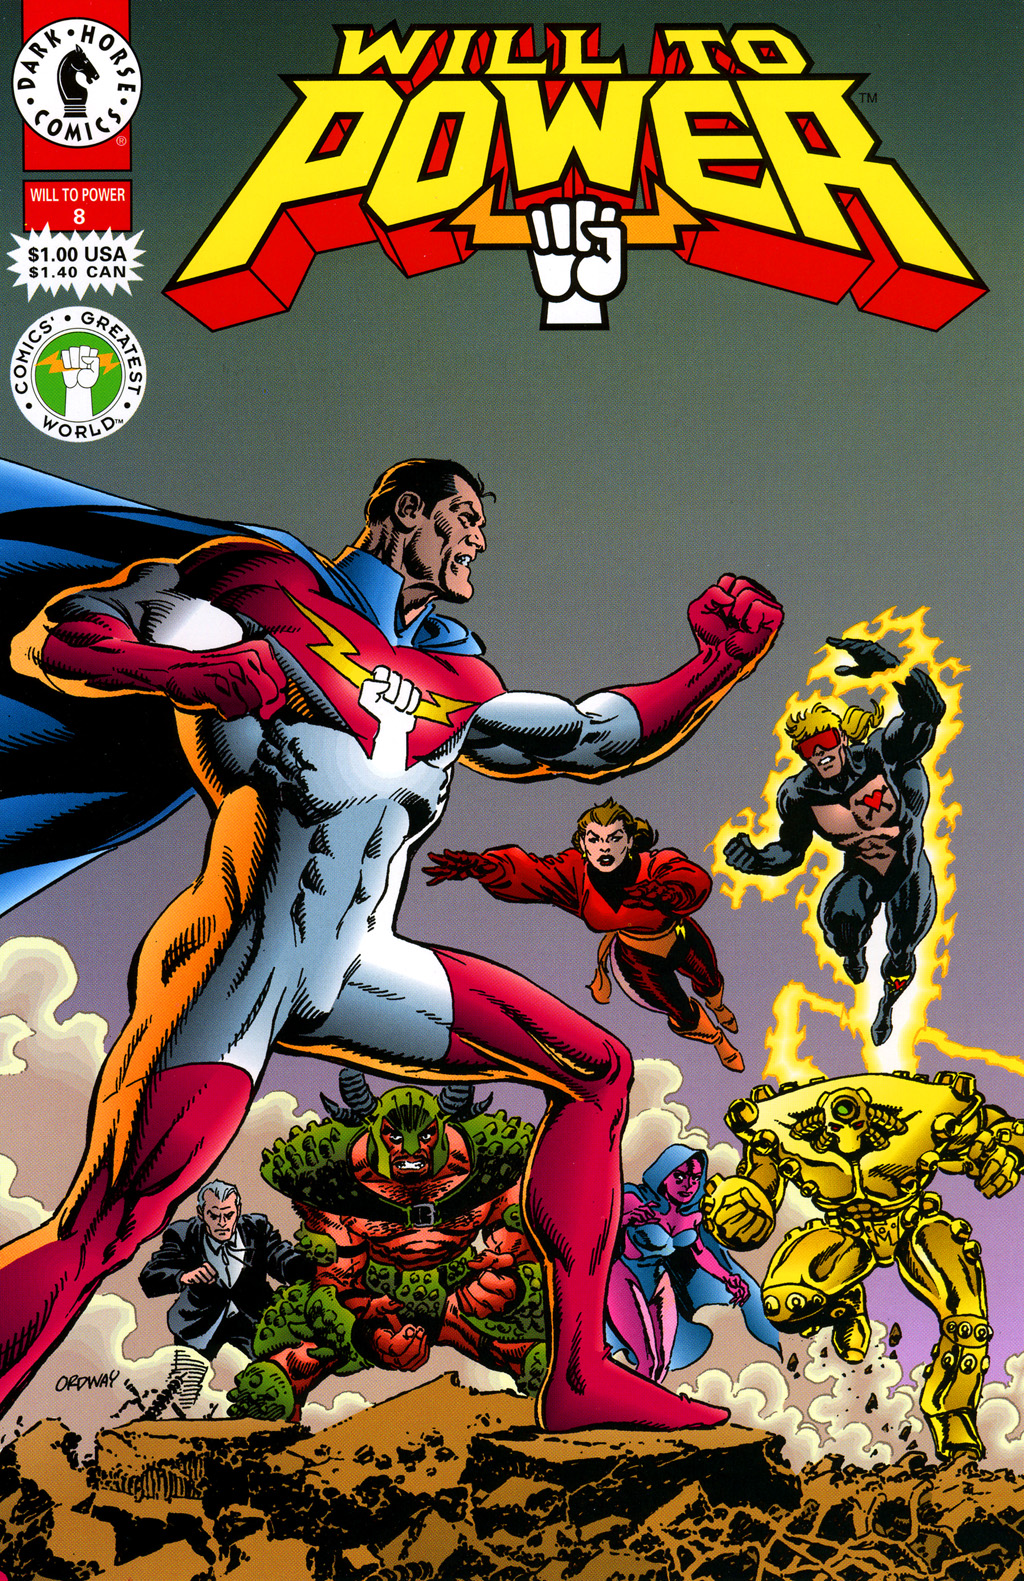 Read online Will to Power comic -  Issue #8 - 1